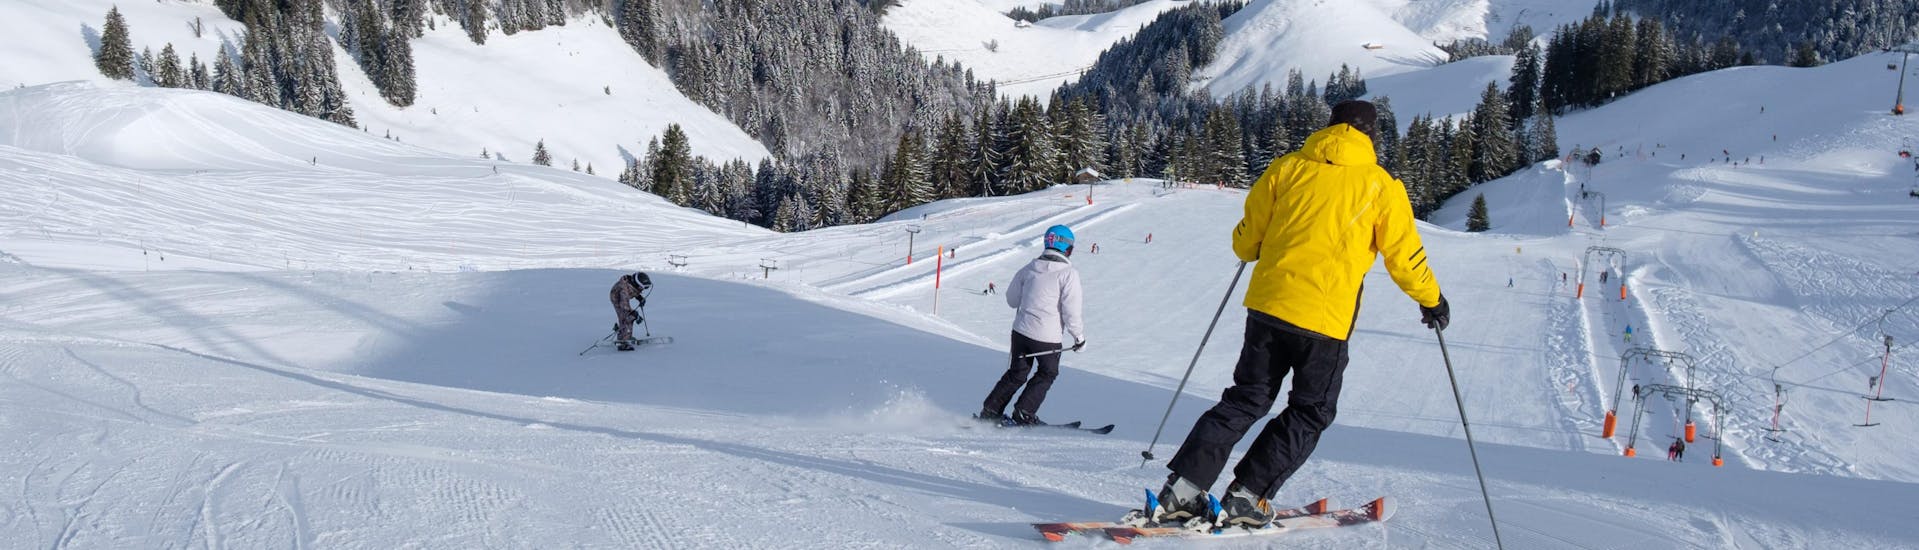 Several skiers are skiing down one of the freshly prepared slopes in the Swiss ski resort of Charmey, a popular place for aspiring skiers who want to book ski lessons with one of the local ski schools.